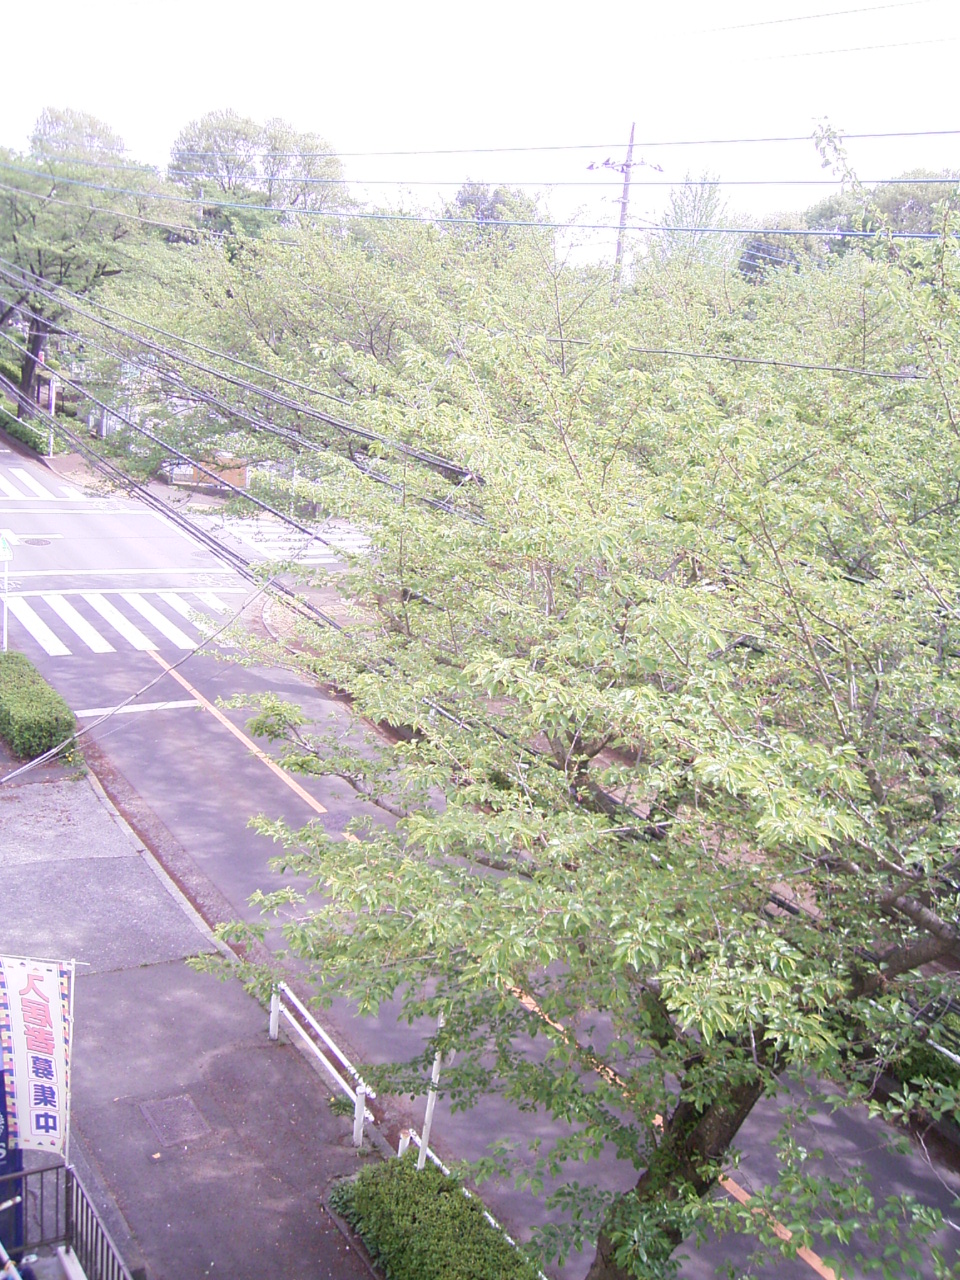 View. It is full of green streets